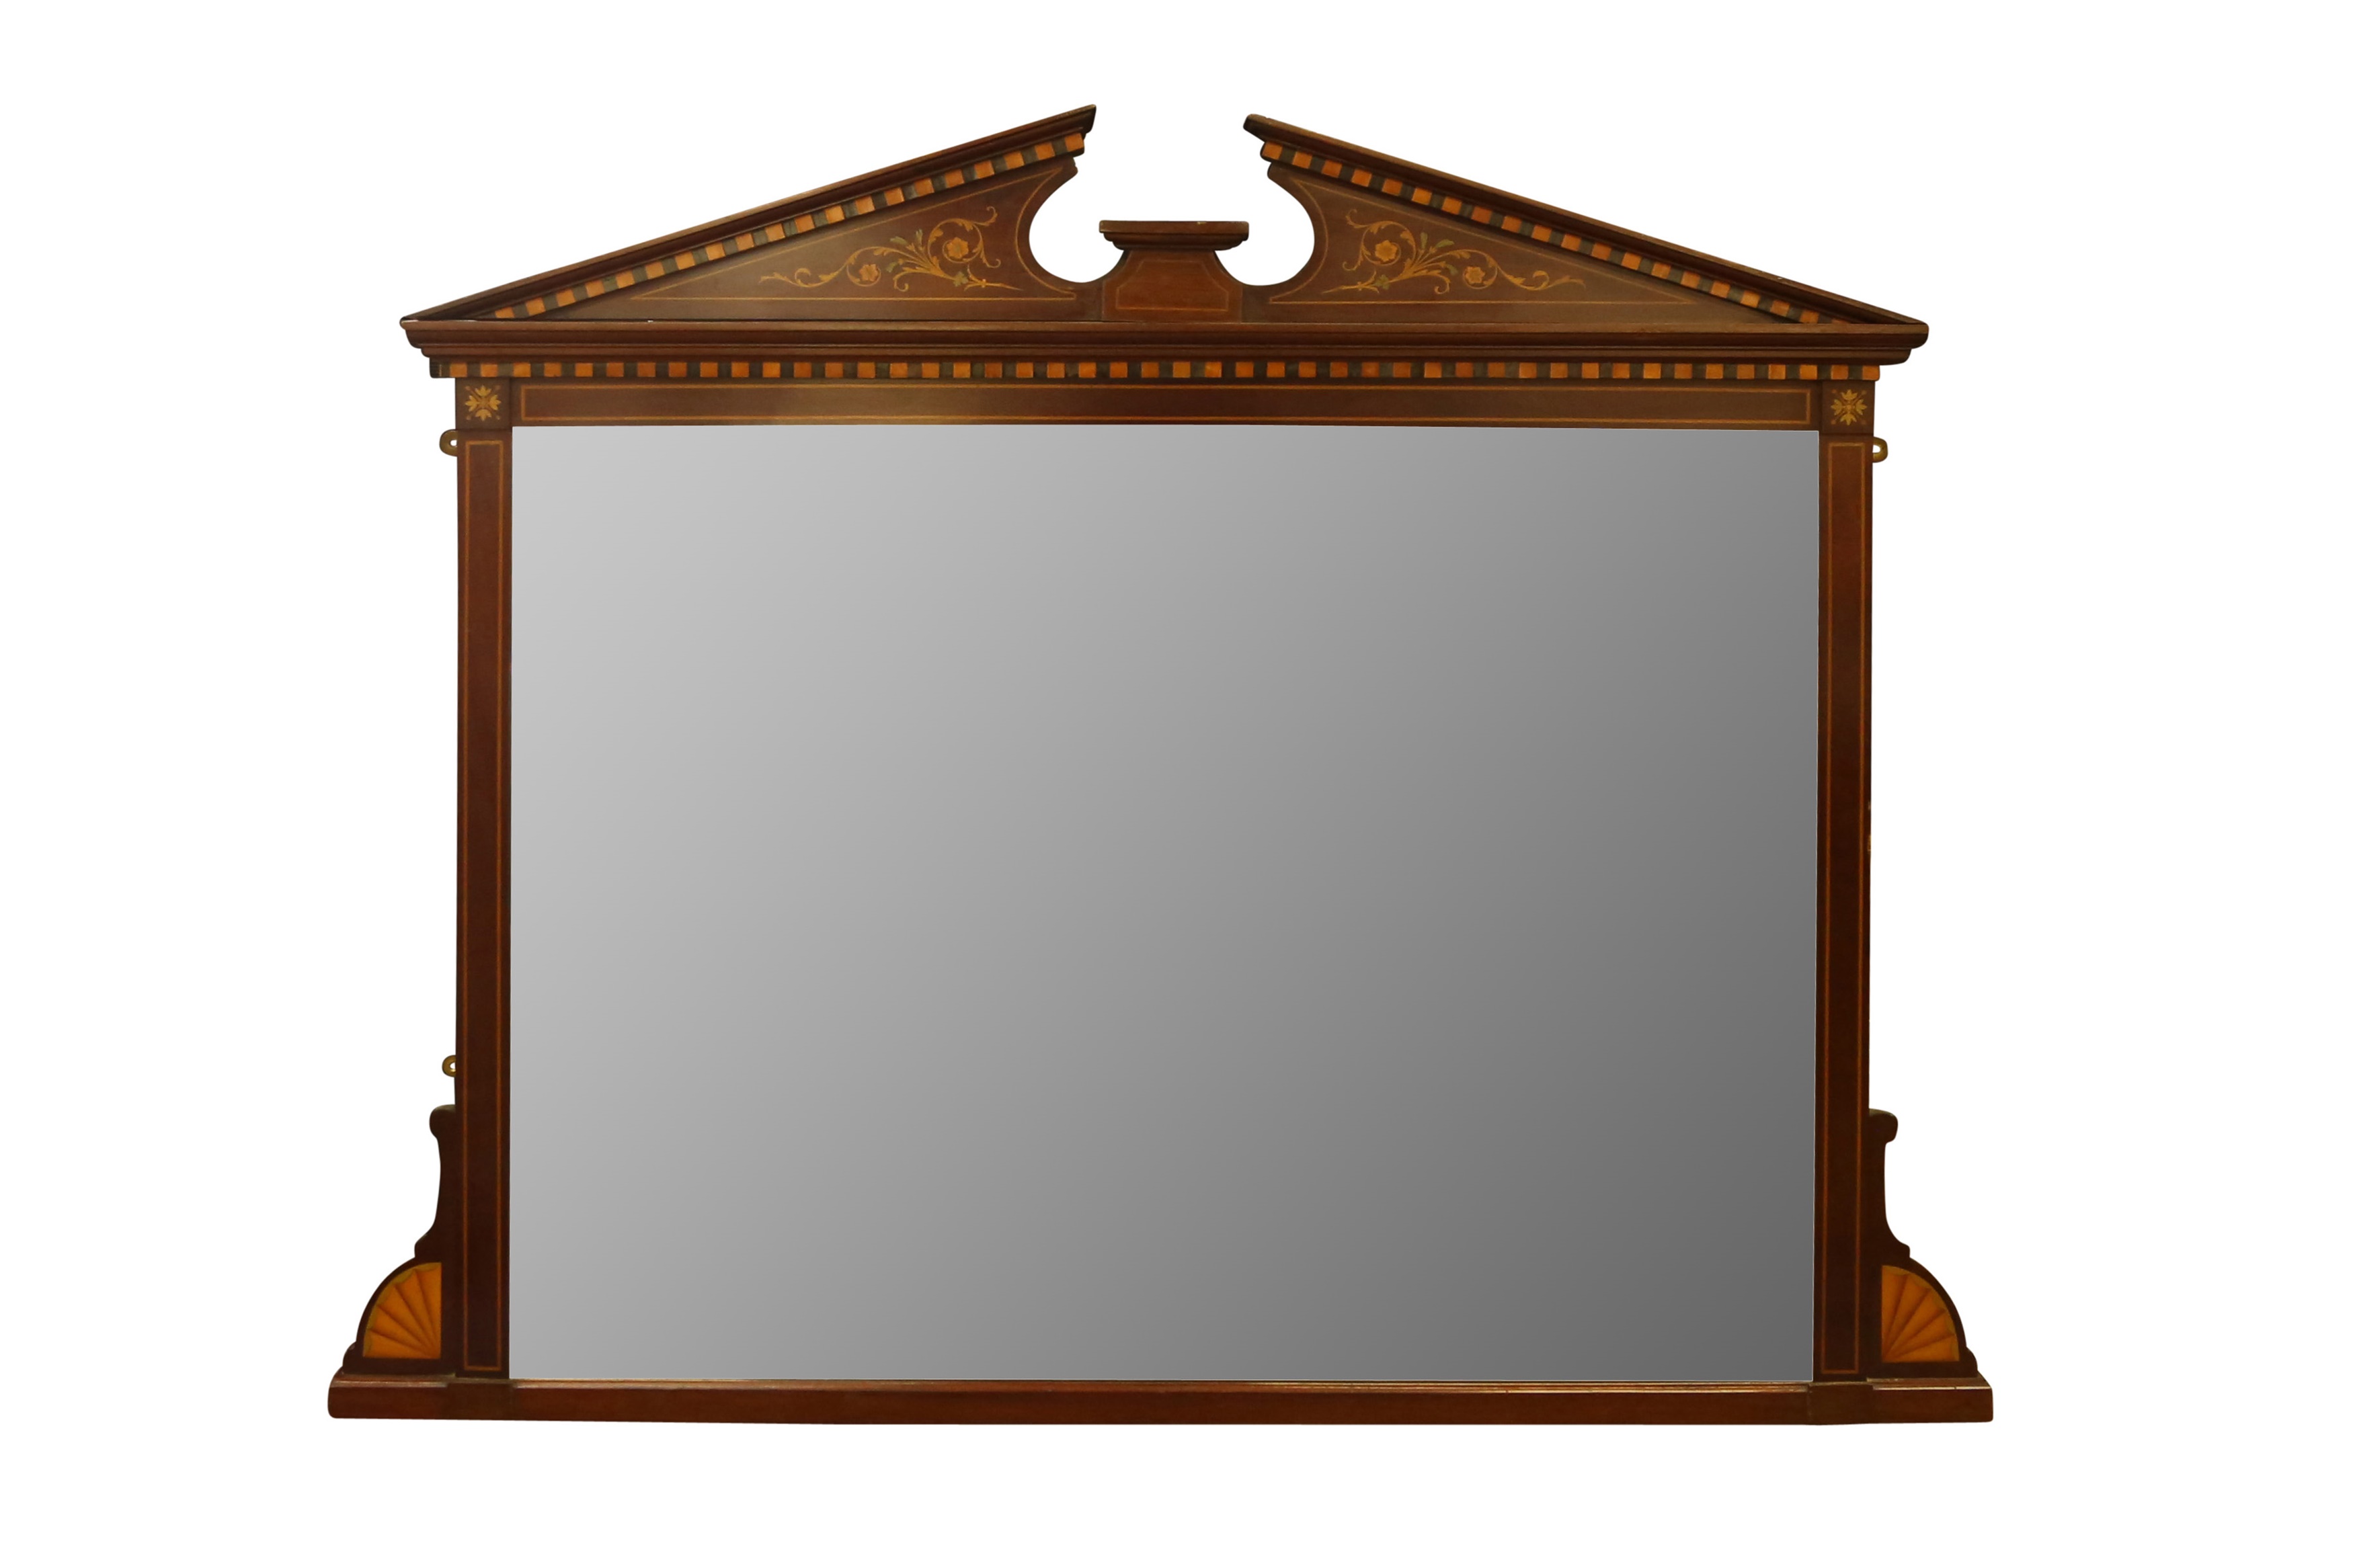 A MAHOGANY MARQUETRY INLAID OVERMANTEL MIRROR